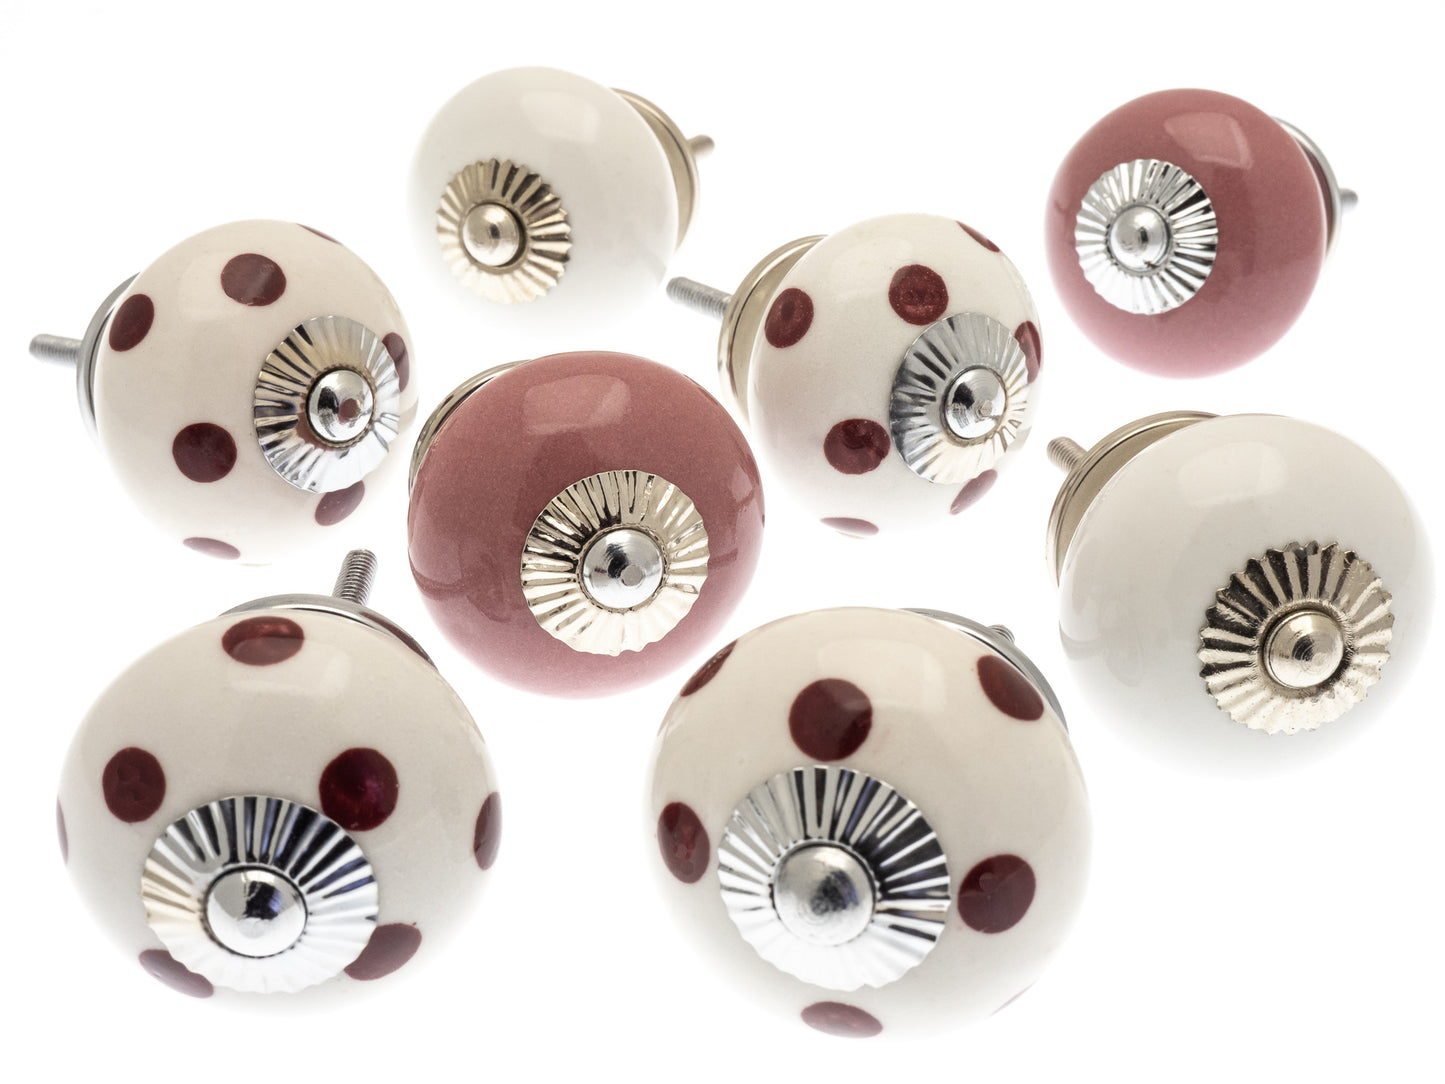 Ceramic Door Knobs Exclusively Designed Hand Painted Dark Pinks and White Knobs - Set of 8